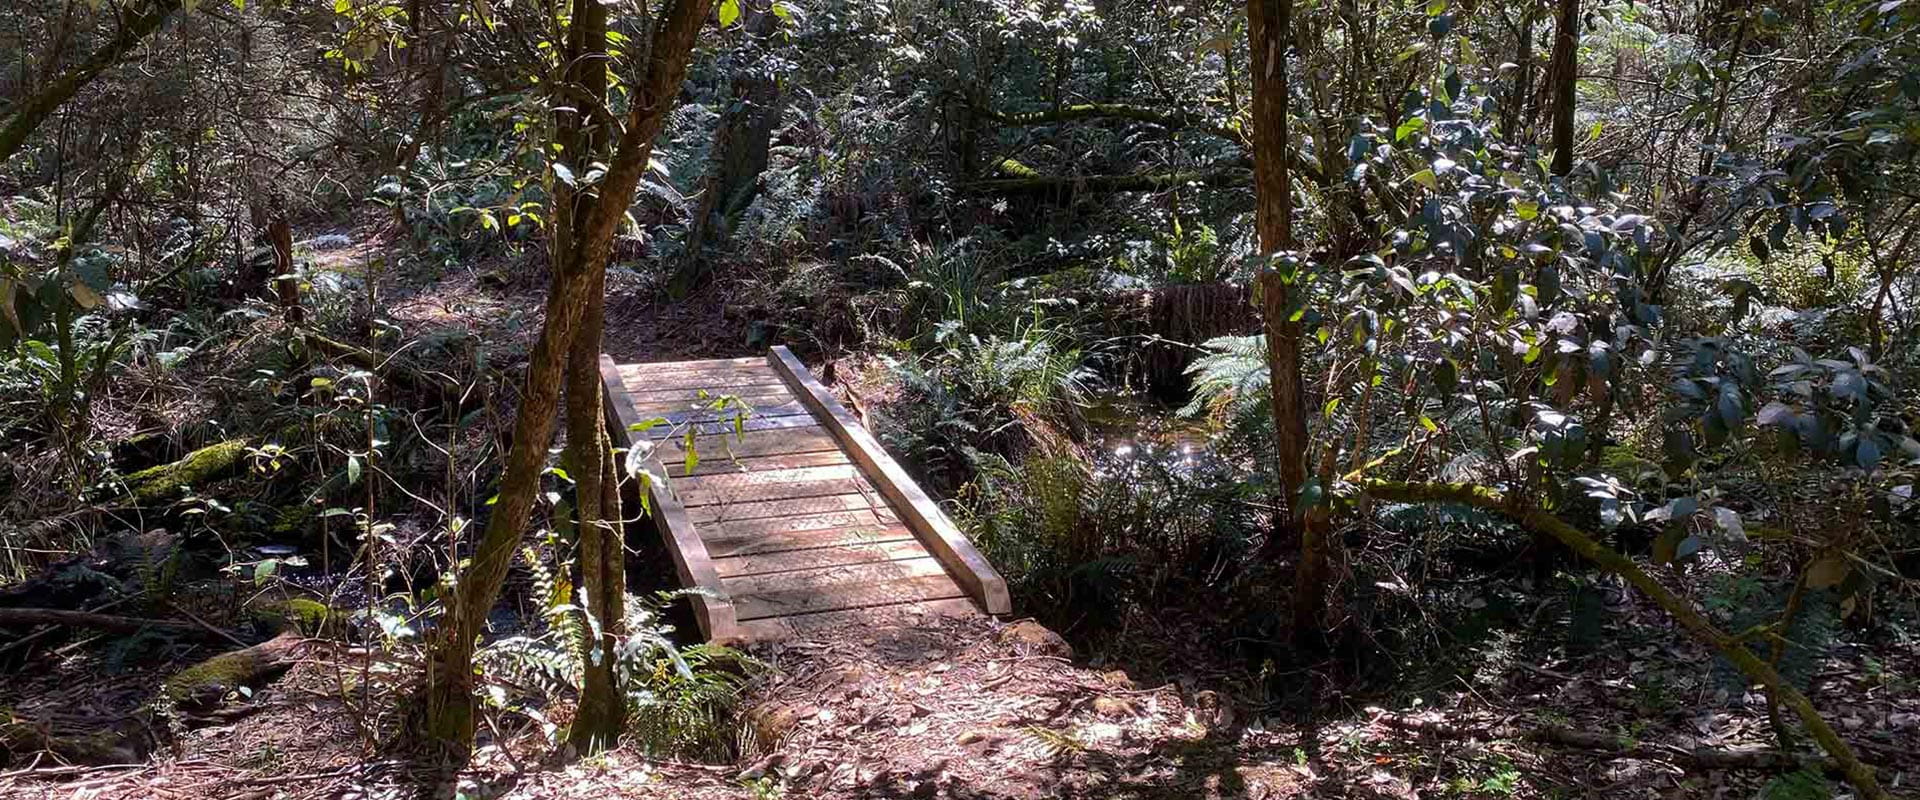 A small wooden bridge over a creek in a lush green forest